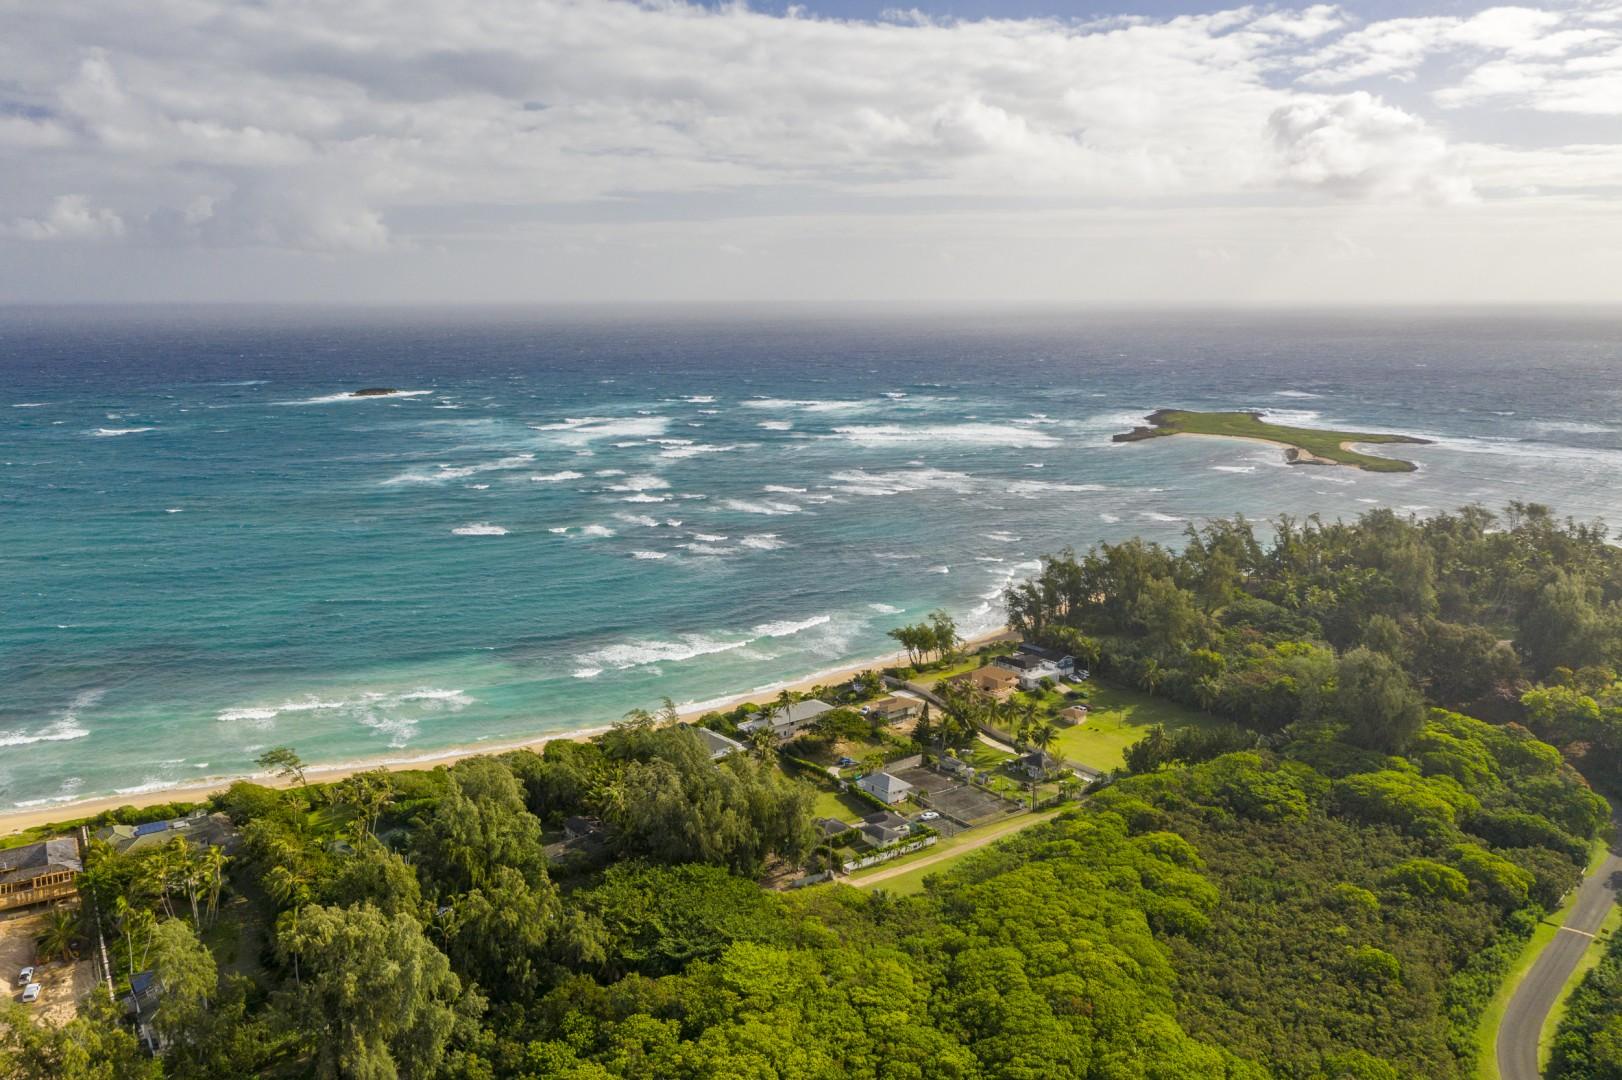 Laie Vacation Rentals, Waipuna Hale - Nearby towns include Kahuku and Laie